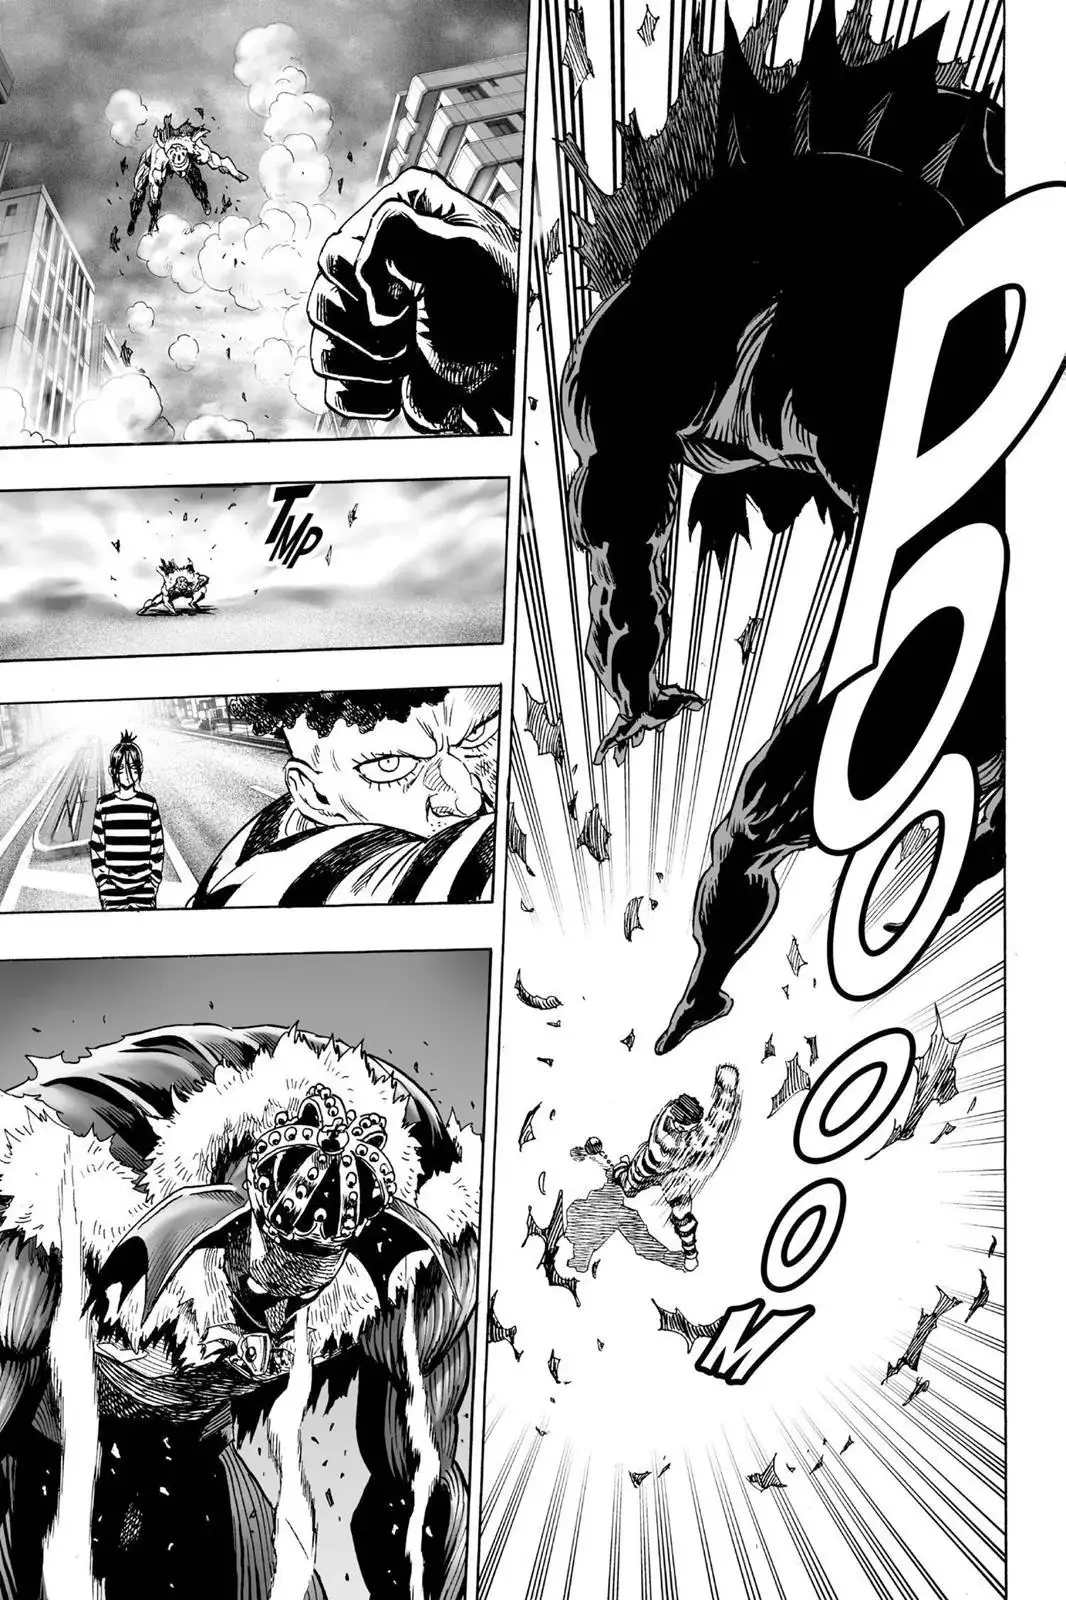 One Punch Man Chapter 25, READ One Punch Man Chapter 25 ONLINE, lost in the cloud genre,lost in the cloud gif,lost in the cloud girl,lost in the cloud goods,lost in the cloud goodreads,lost in the cloud,lost ark cloud gaming,lost odyssey cloud gaming,lost in the cloud fanart,lost in the cloud fanfic,lost in the cloud fandom,lost in the cloud first kiss,lost in the cloud font,lost in the cloud ending,lost in the cloud episode 97,lost in the cloud edit,lost in the cloud explained,lost in the cloud dog,lost in the cloud discord server,lost in the cloud desktop wallpaper,lost in the cloud drawing,can't find my cloud on network,lost in the cloud characters,lost in the cloud chapter 93 release date,lost in the cloud birthday,lost in the cloud birthday art,lost in the cloud background,lost in the cloud banner,lost in the clouds meaning,what is the black cloud in lost,lost in the cloud ao3,lost in the cloud anime,lost in the cloud art,lost in the cloud author twitter,lost in the cloud author instagram,lost in the cloud artist,lost in the cloud acrylic stand,lost in the cloud artist twitter,lost in the cloud art style,lost in the cloud analysis